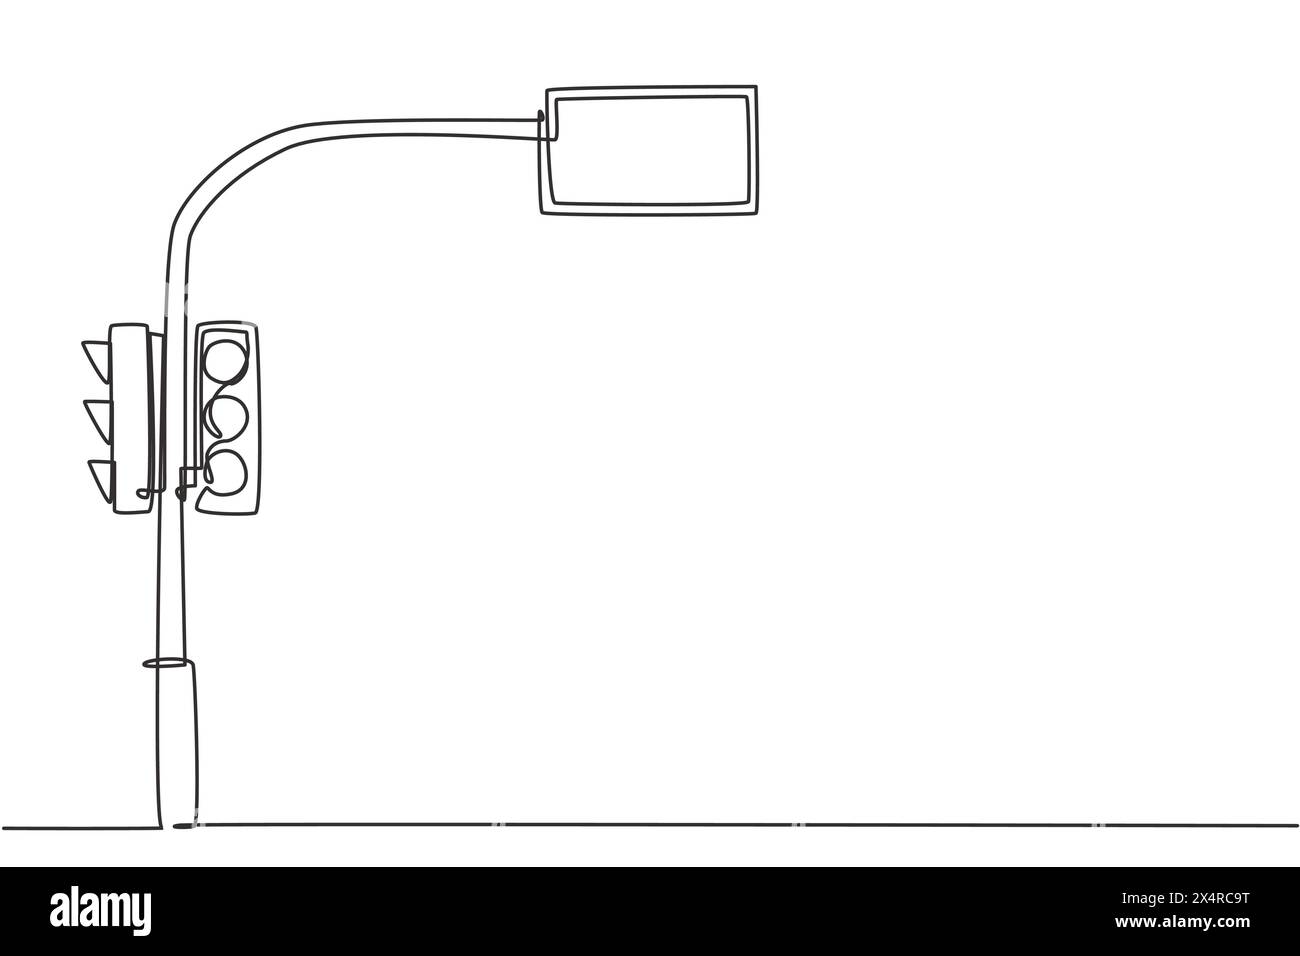 Single one line drawing of a traffic light that uses countdown time to inform road users of remaining stop time and road time. Modern continuous line Stock Vector